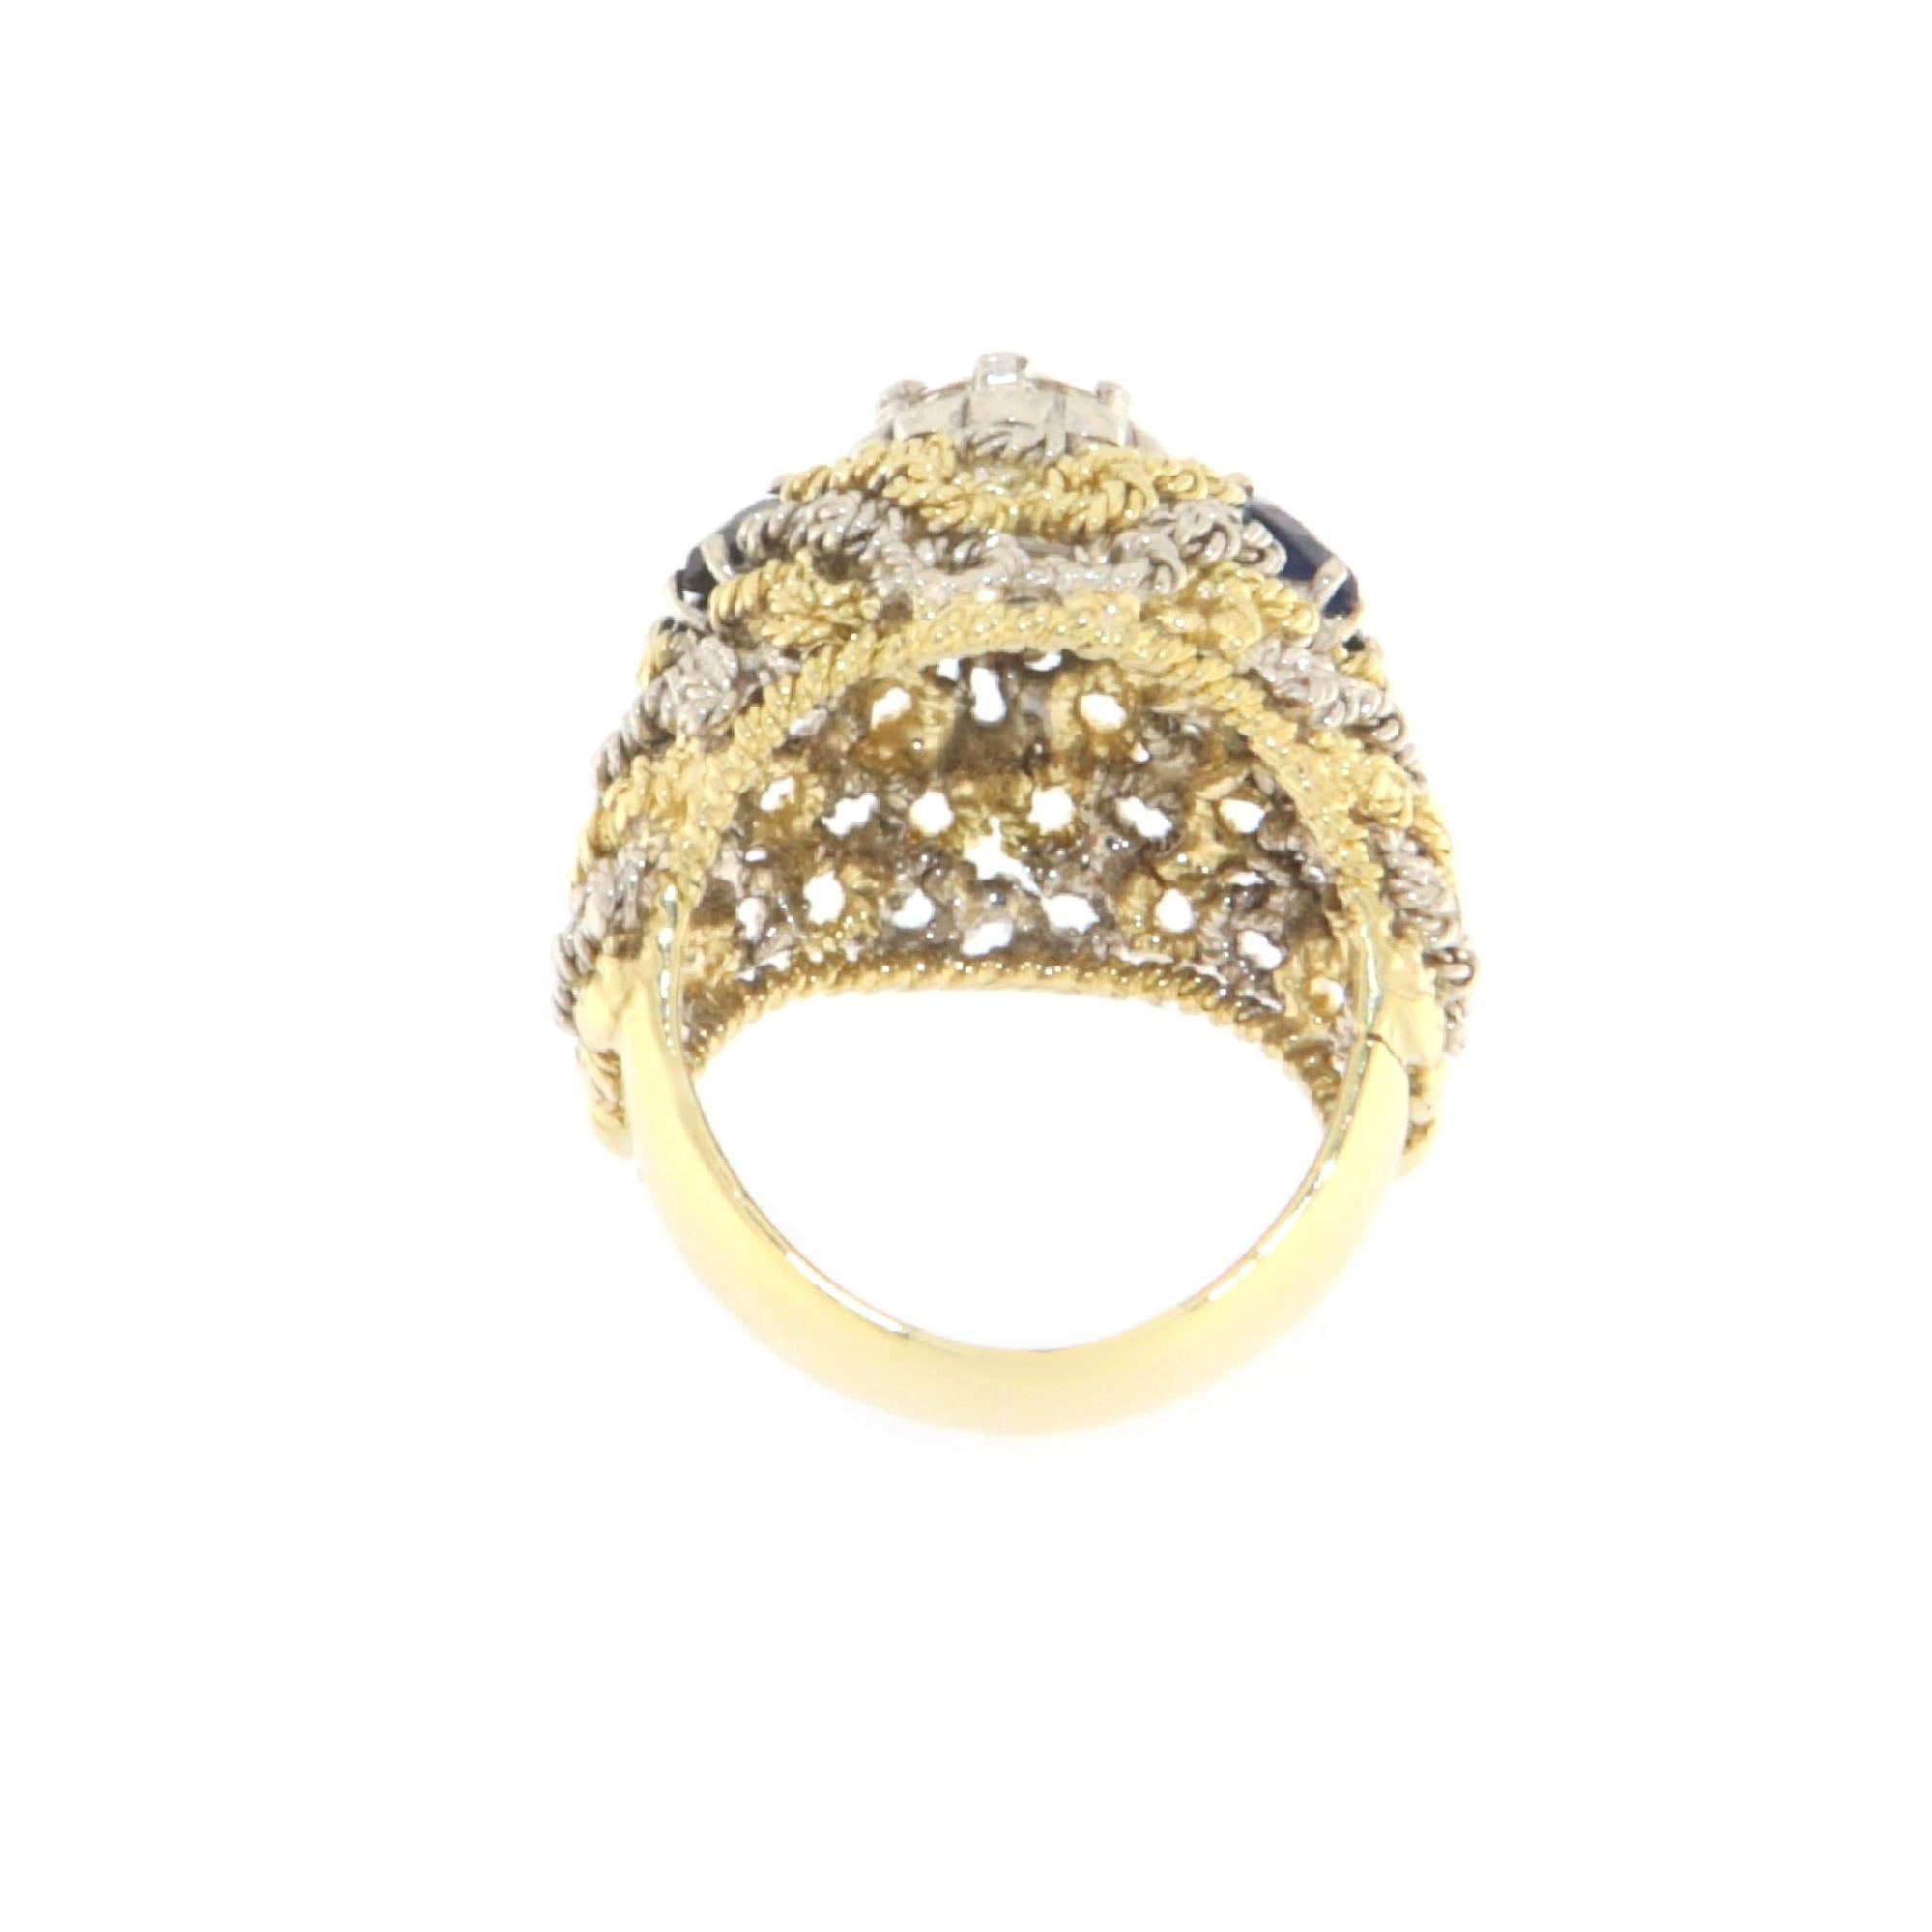 Brilliant Cut Sapphires Diamonds 18 Karat White And Yellow Gold Cocktail Ring For Sale